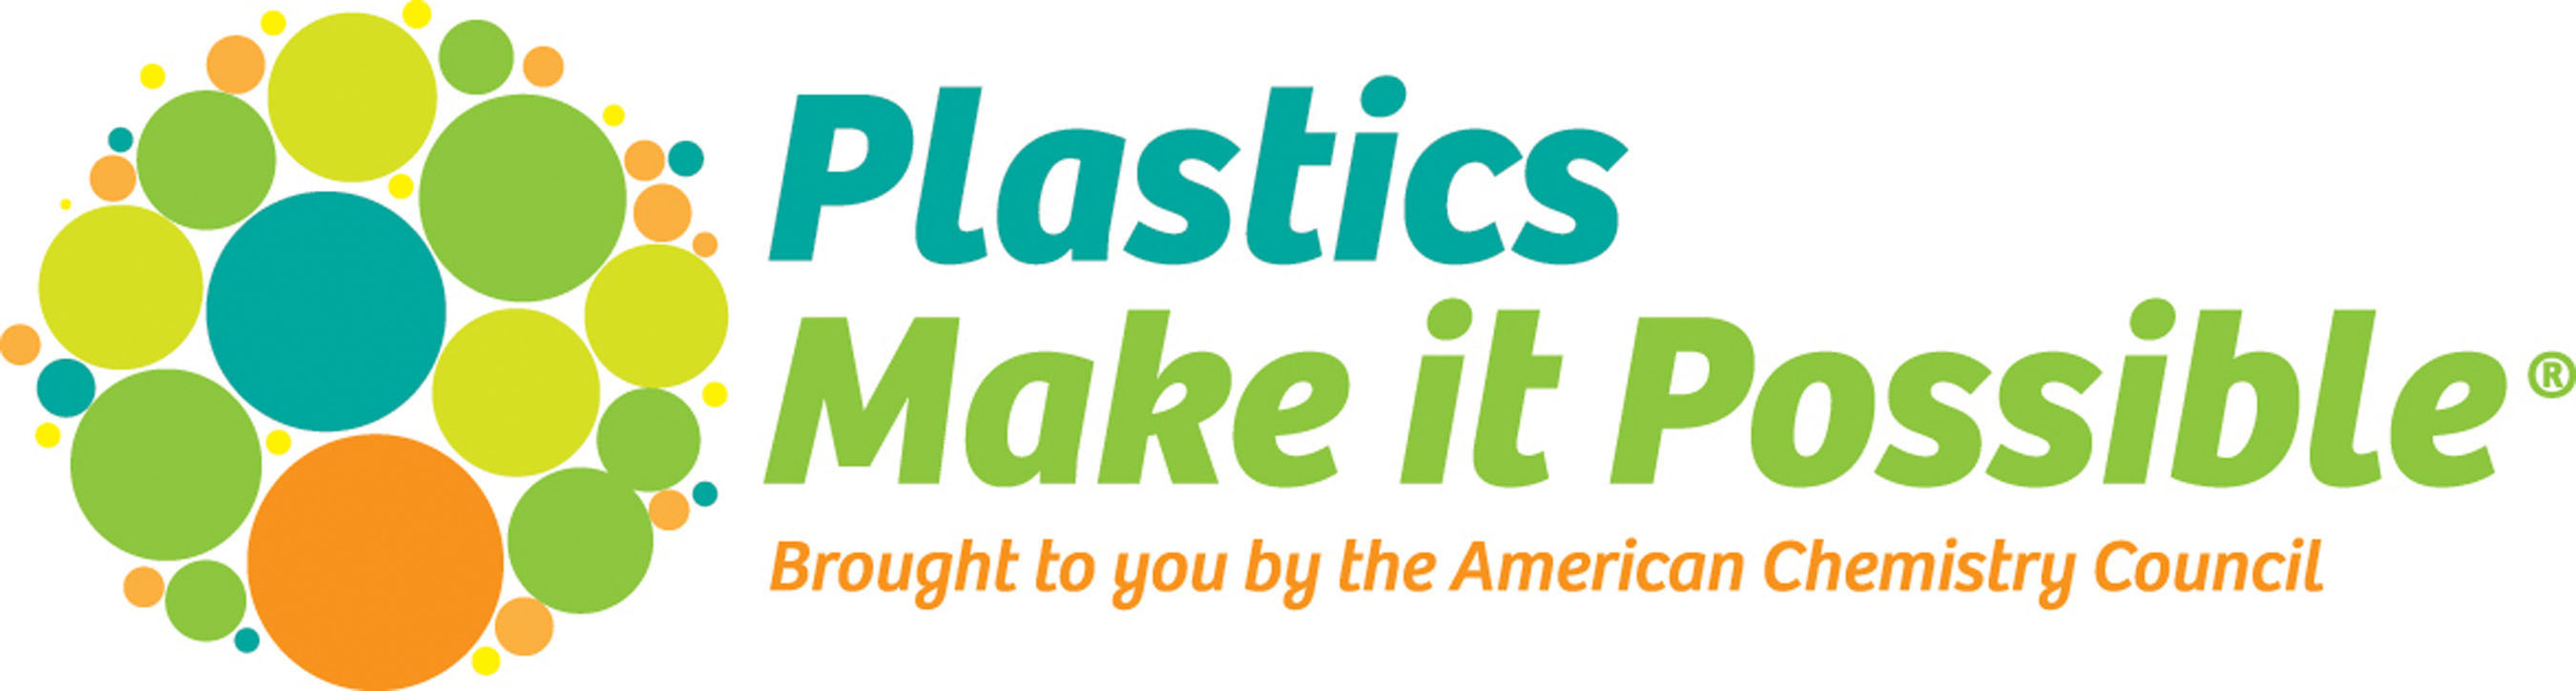 Plastics Make it Possible is an Initiative Sponsored by the Plastics Industries of the American Chemistry Council.